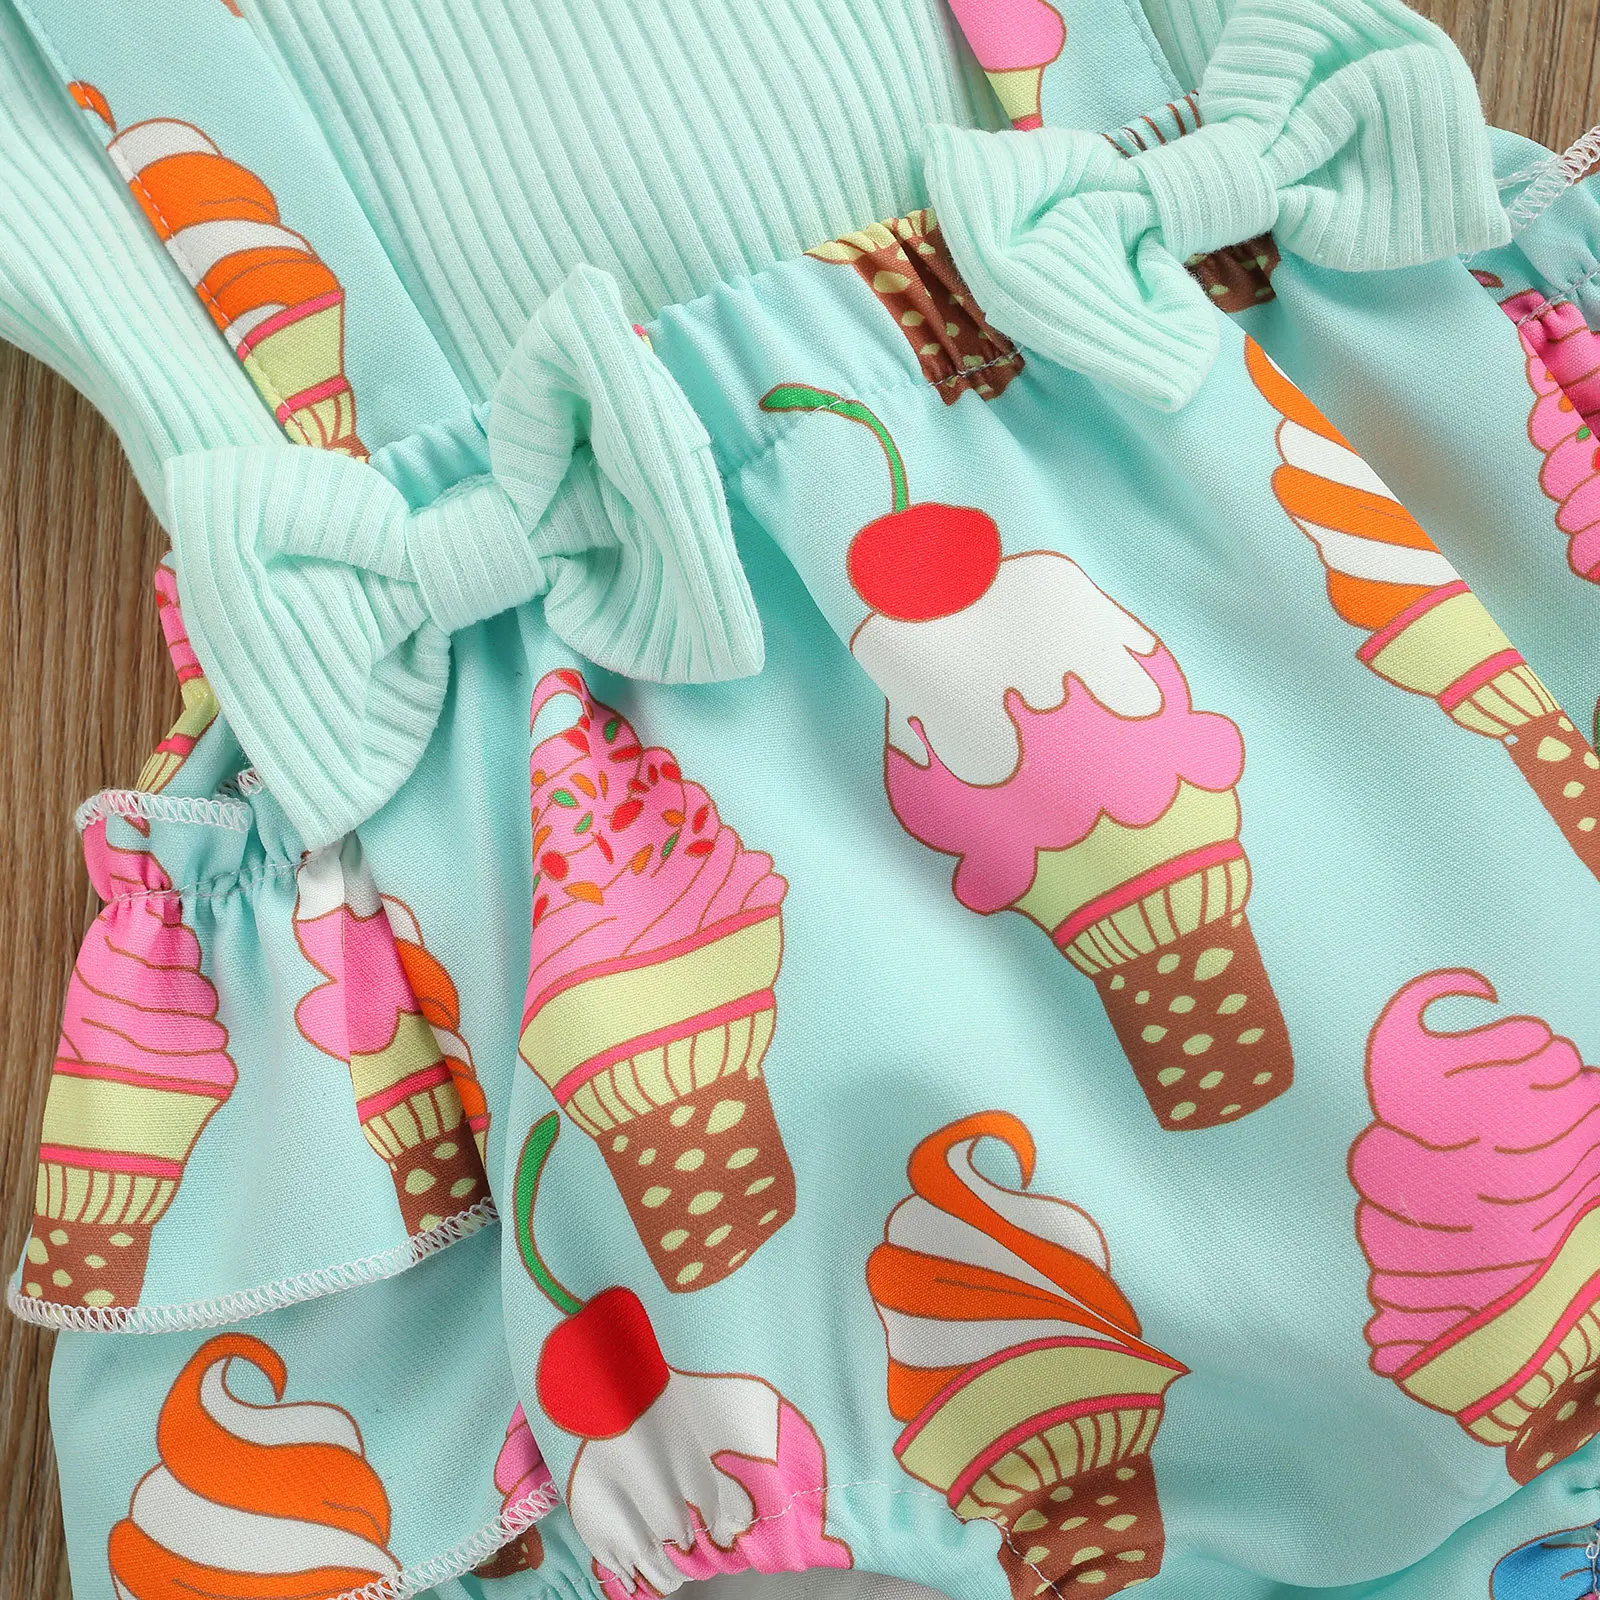 baby clothing set long sleeve	 2Pcs Baby Girls Summer Outfits Kids  Fly Sleeve Rib Knit Shirt Tops +Bow Suspender Skirt Set Icecream Printing Clothes baby outfit matching set